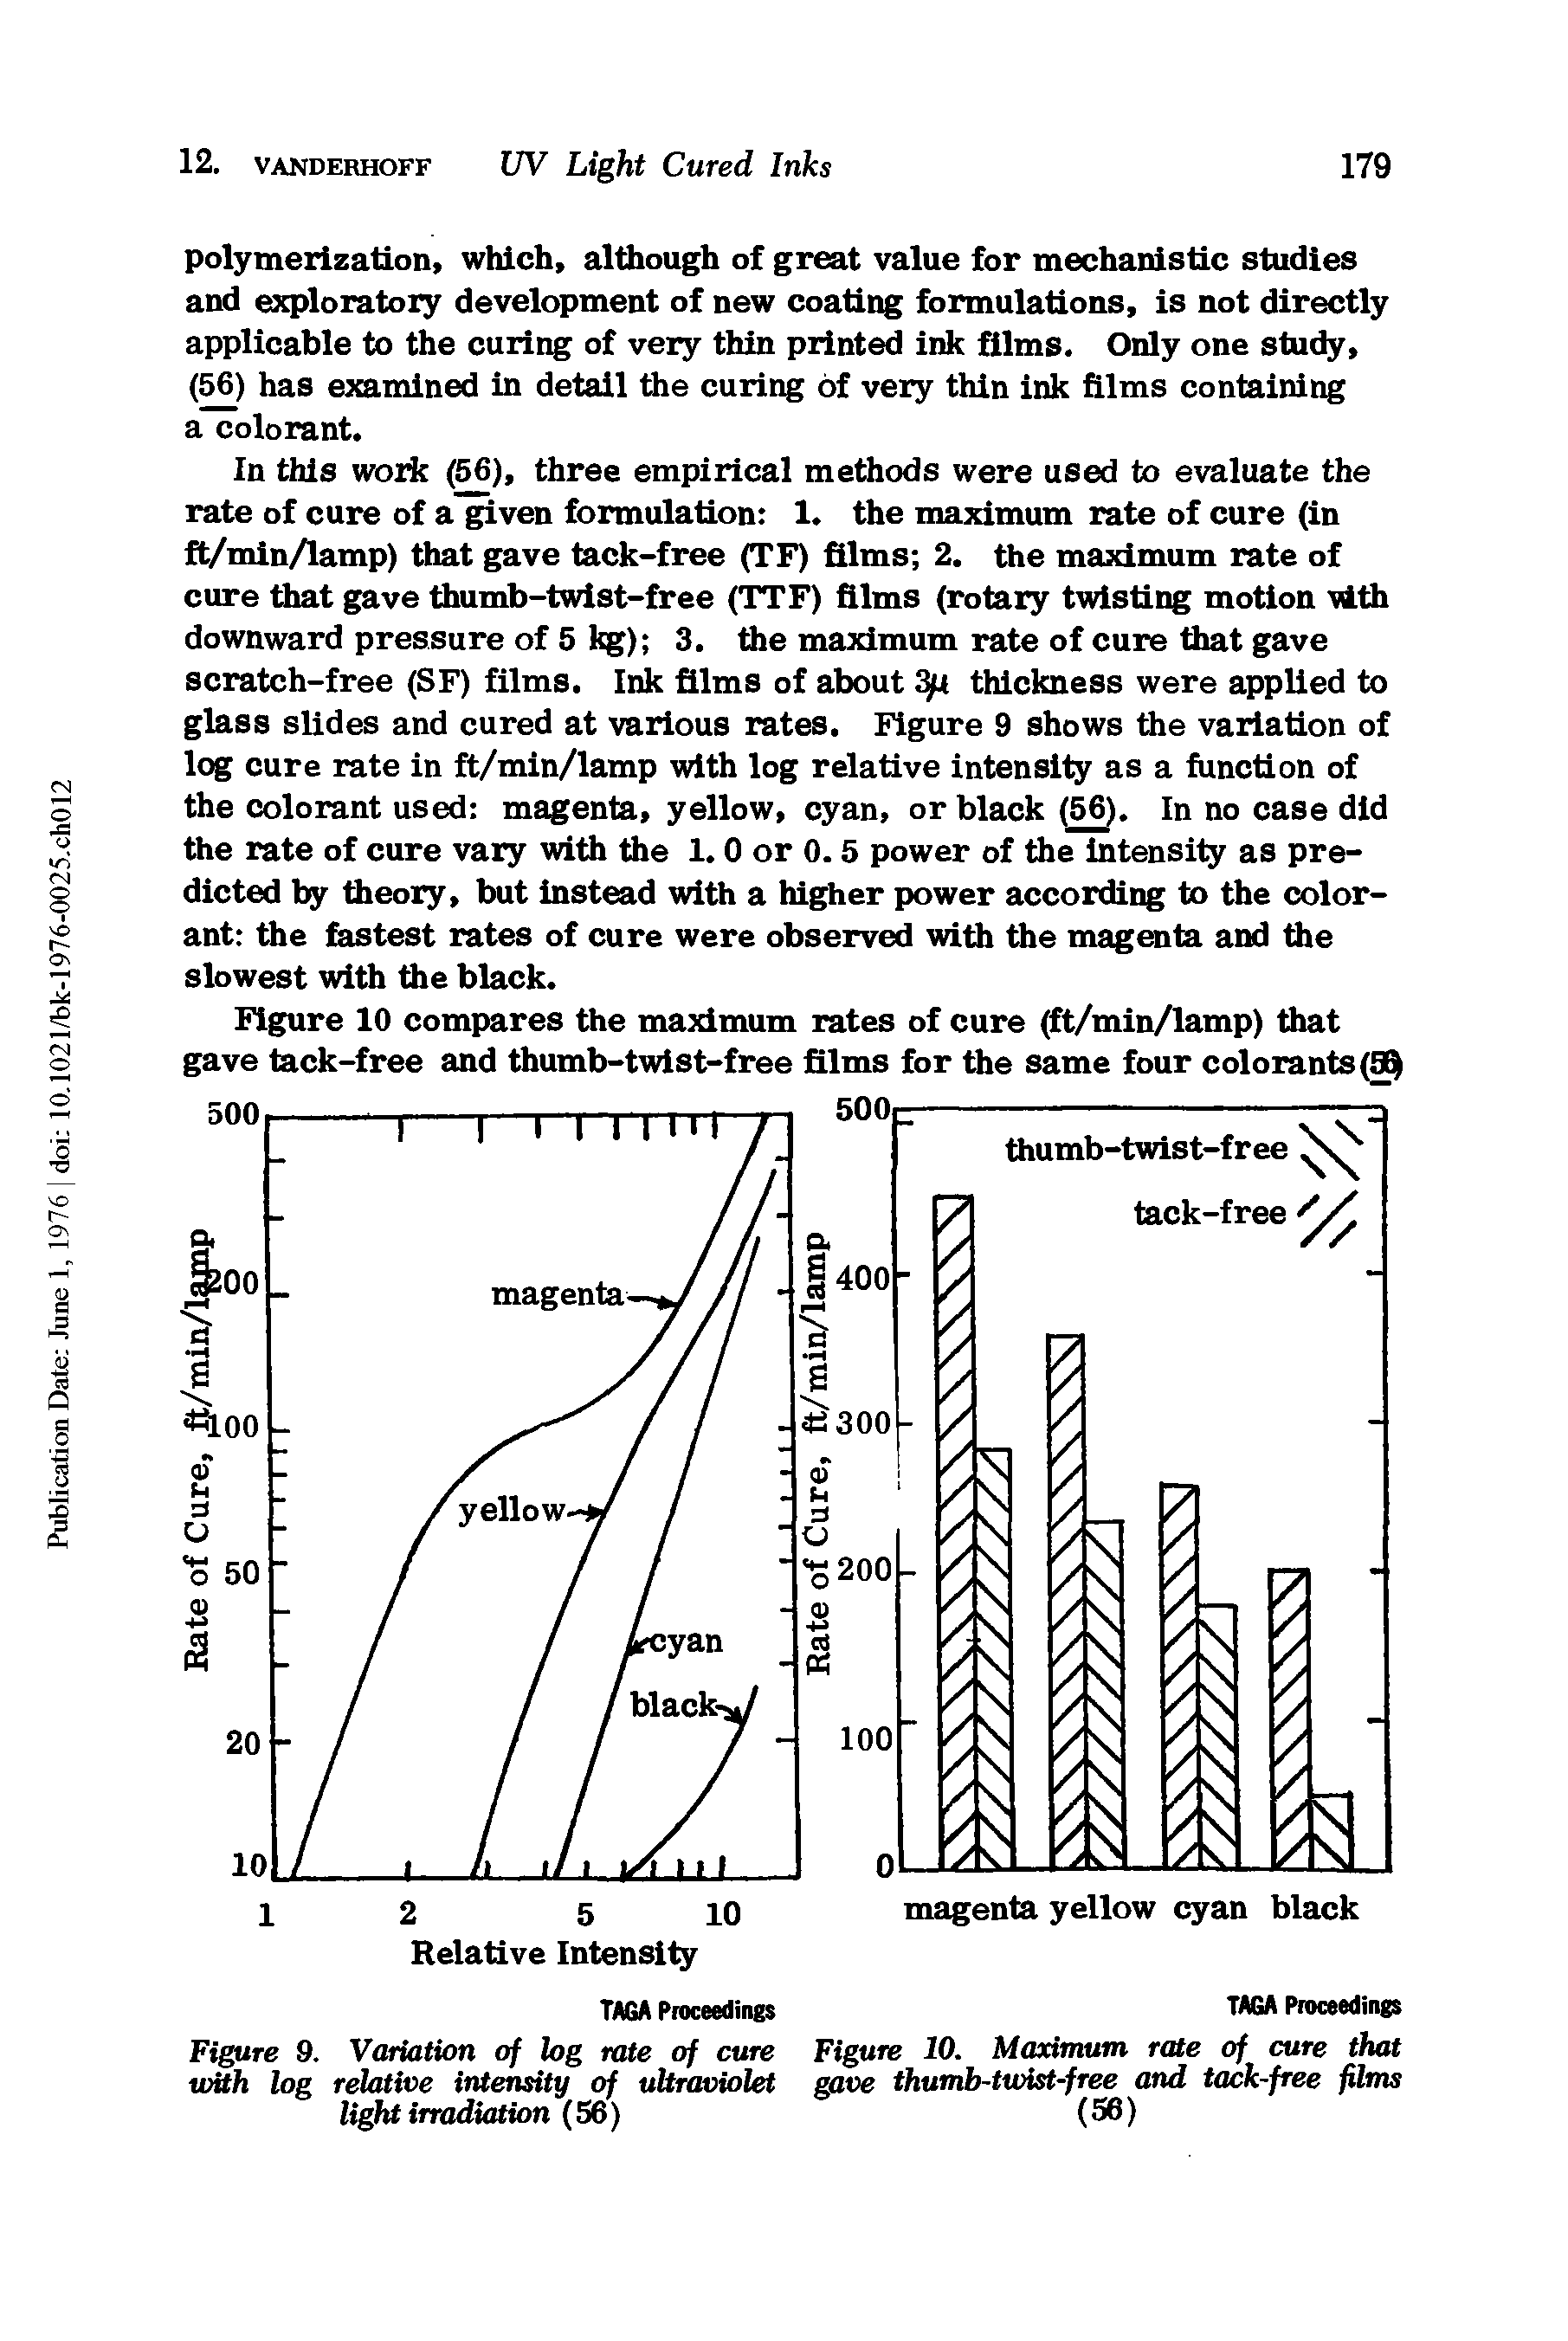 Figure 9. Variation of log rate of cure with log relative intensity of ultraviolet light irradiation (56)...